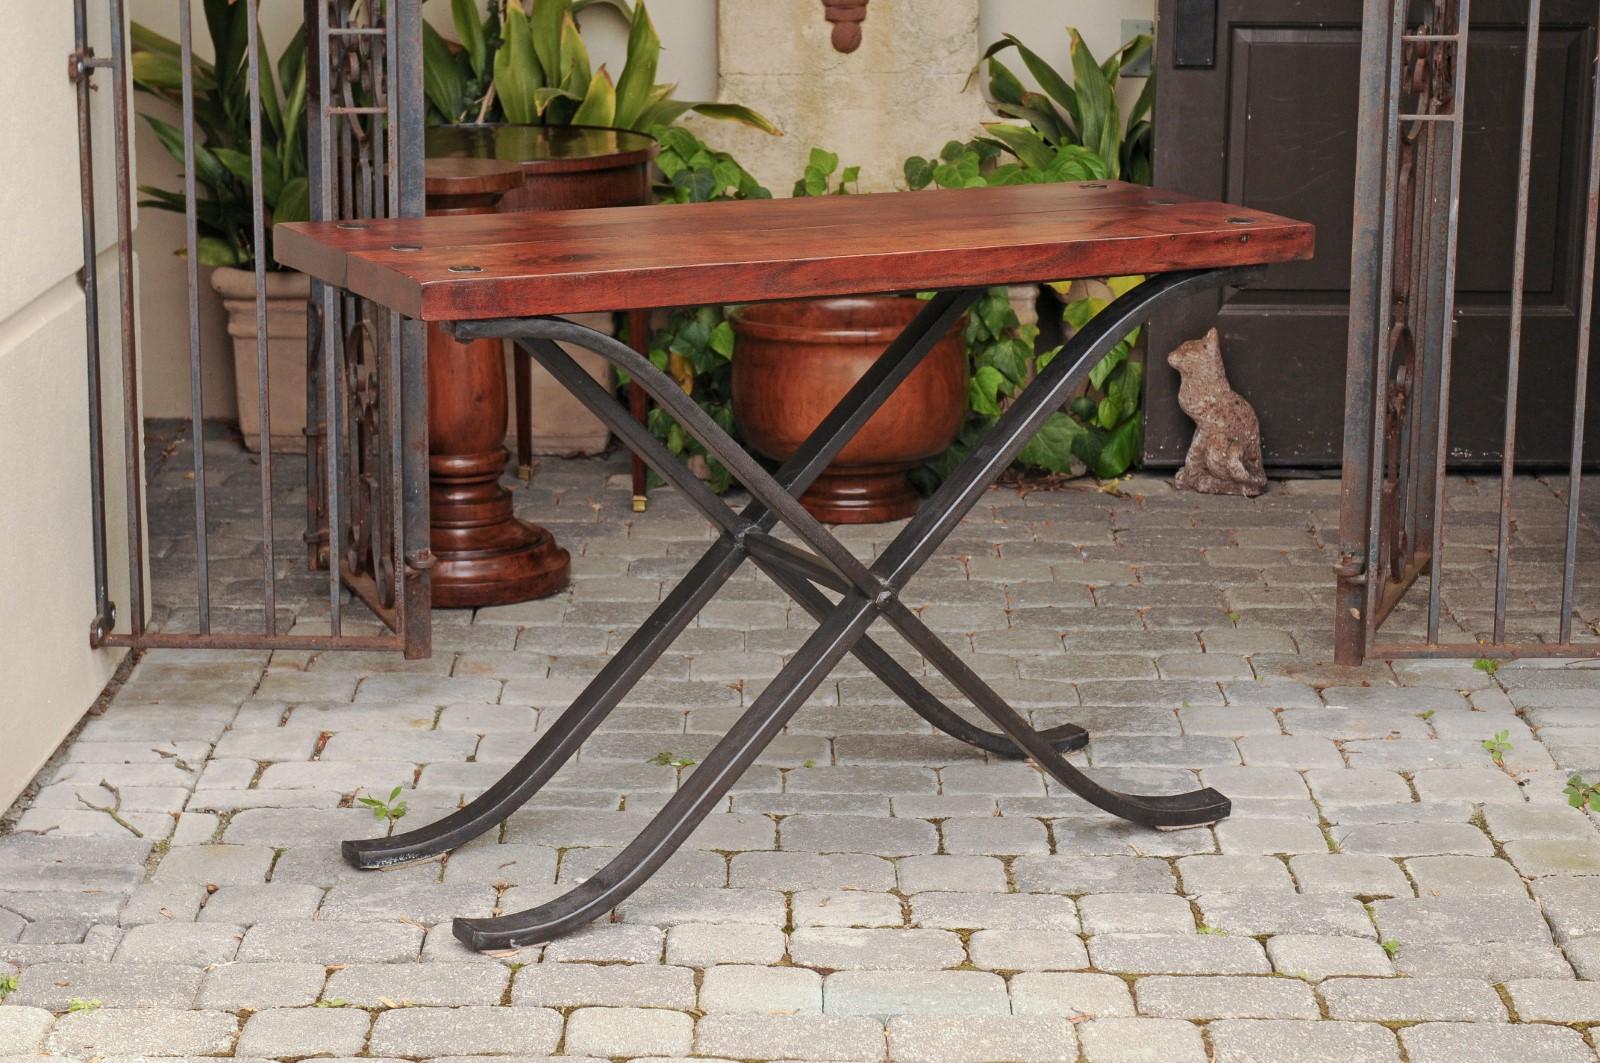 A vintage French narrow walnut and iron table from the mid-20th century, with curving x-form base. Born in France during the mid-century period, this stylish table features a rectangular planked walnut top accented with large nailheads, sitting